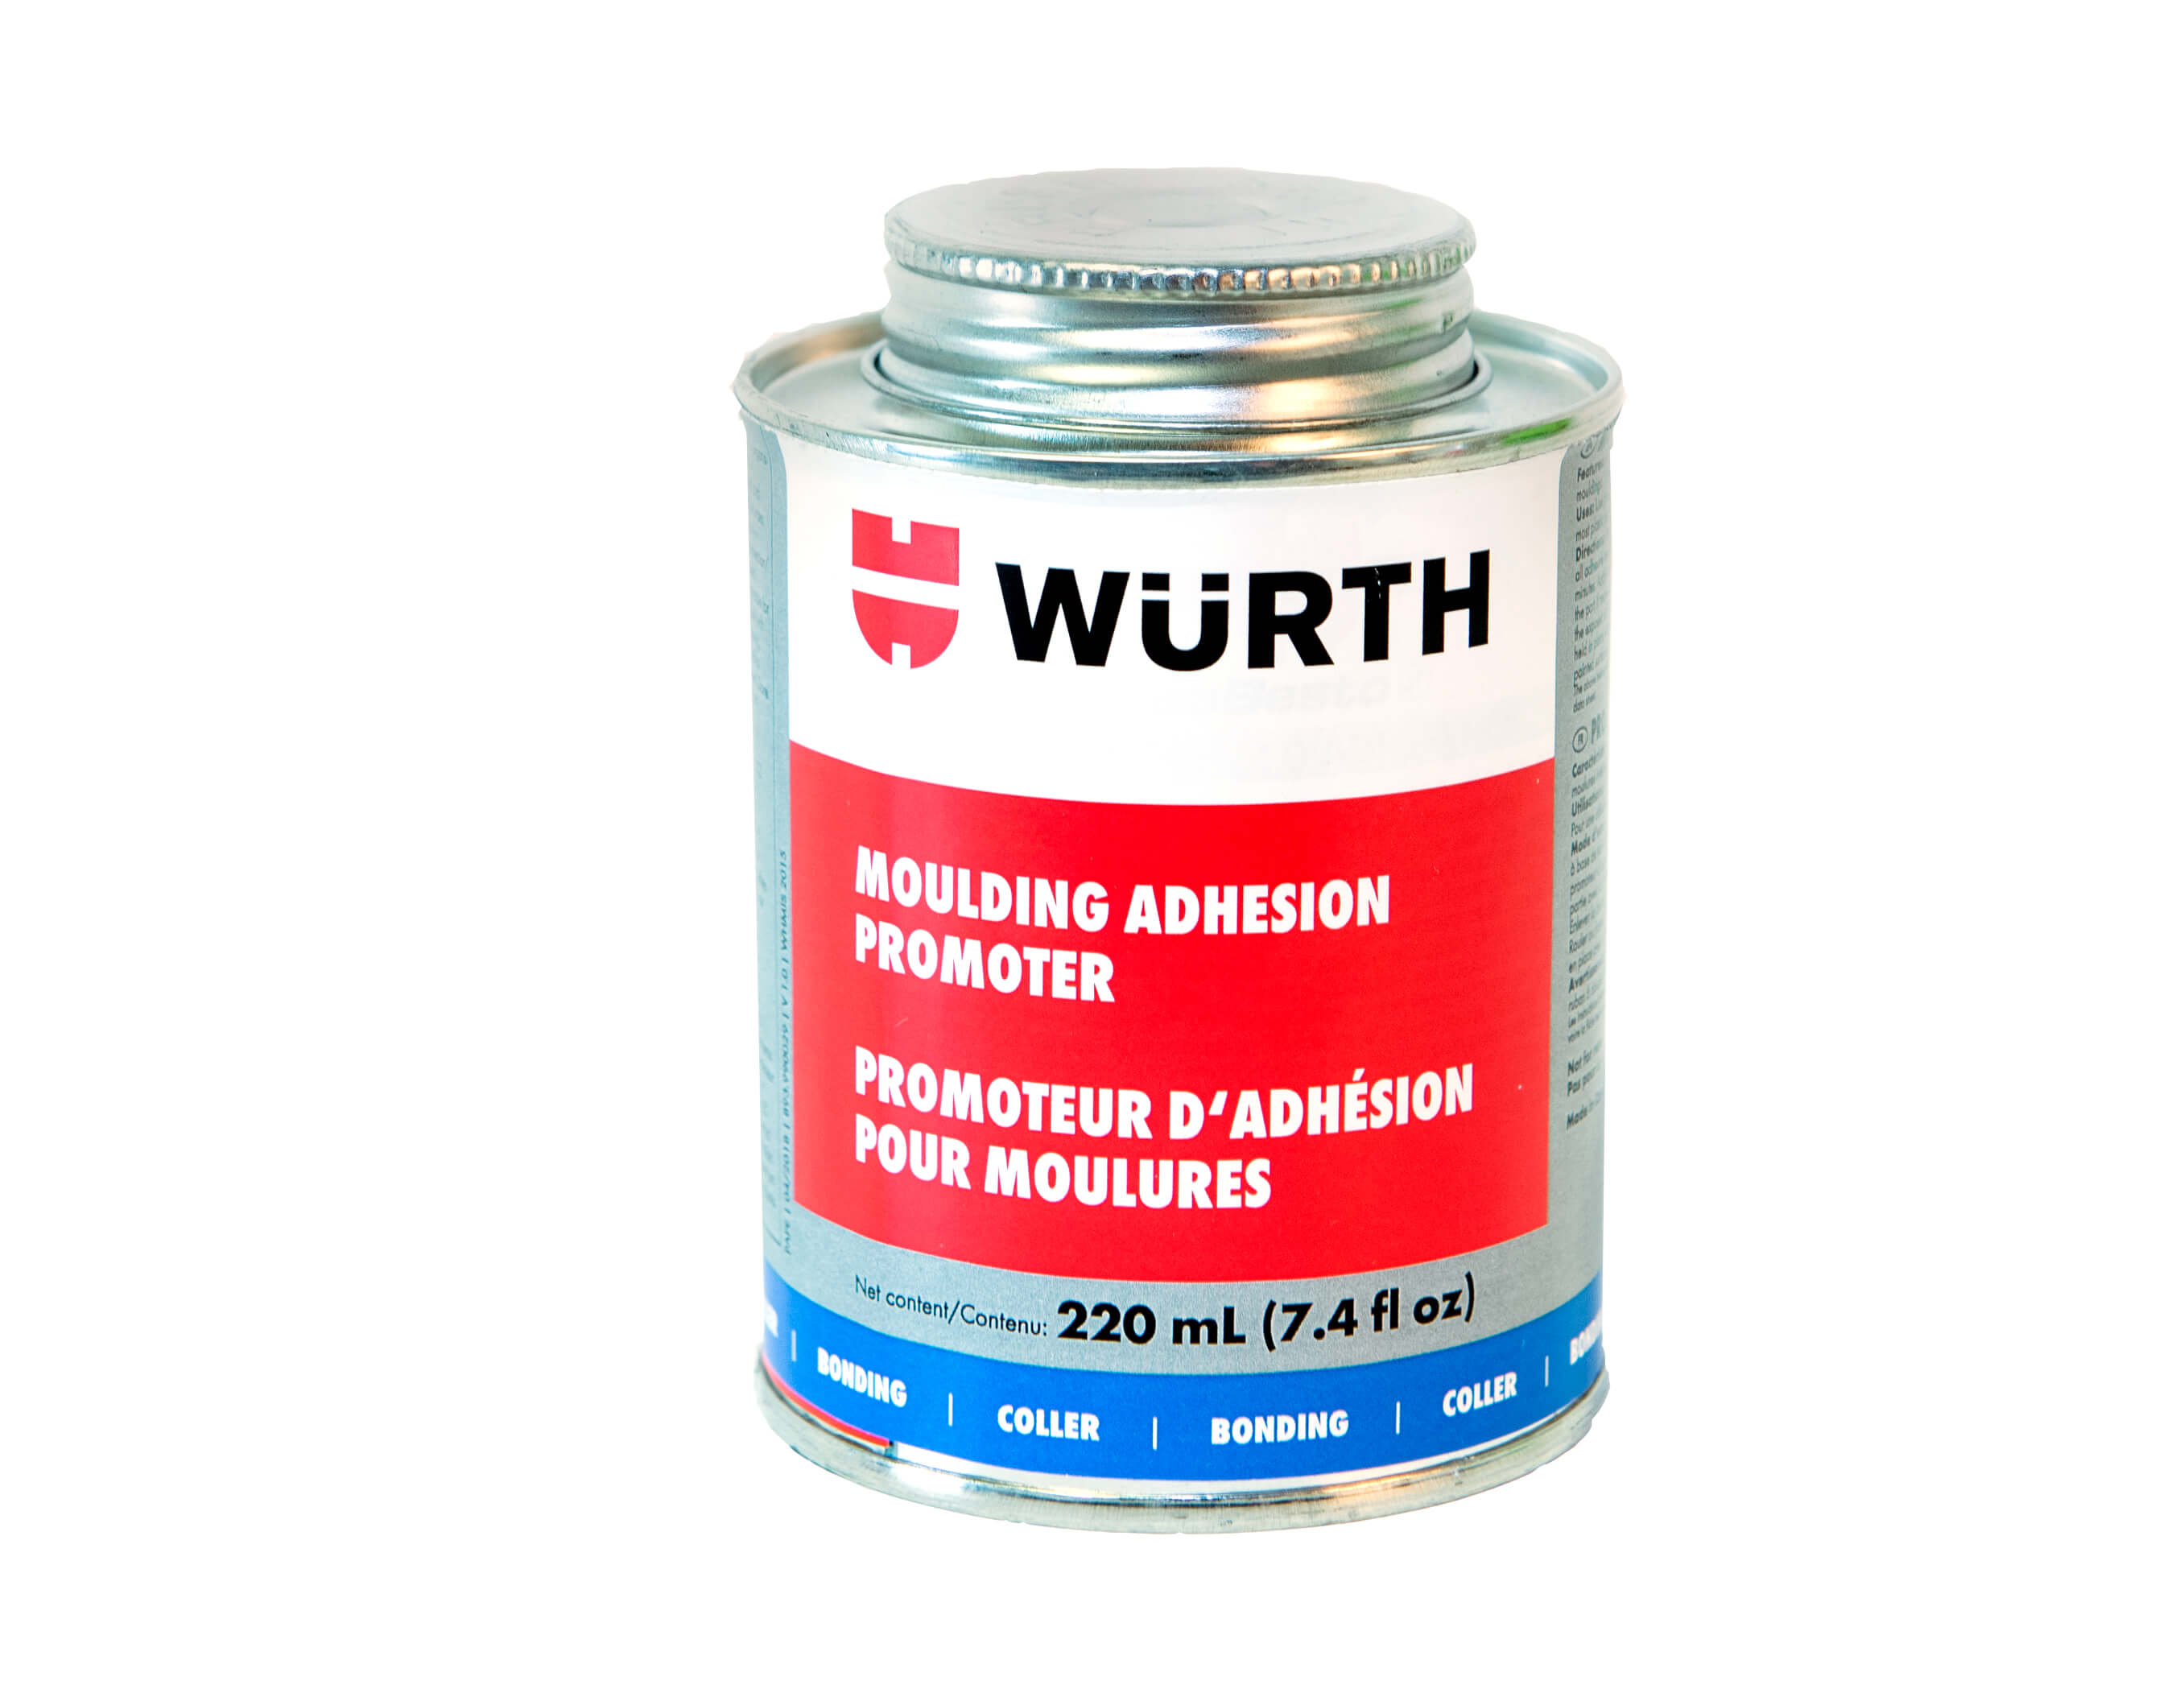 MOULDING ADHESION PROMOTER 220 mL